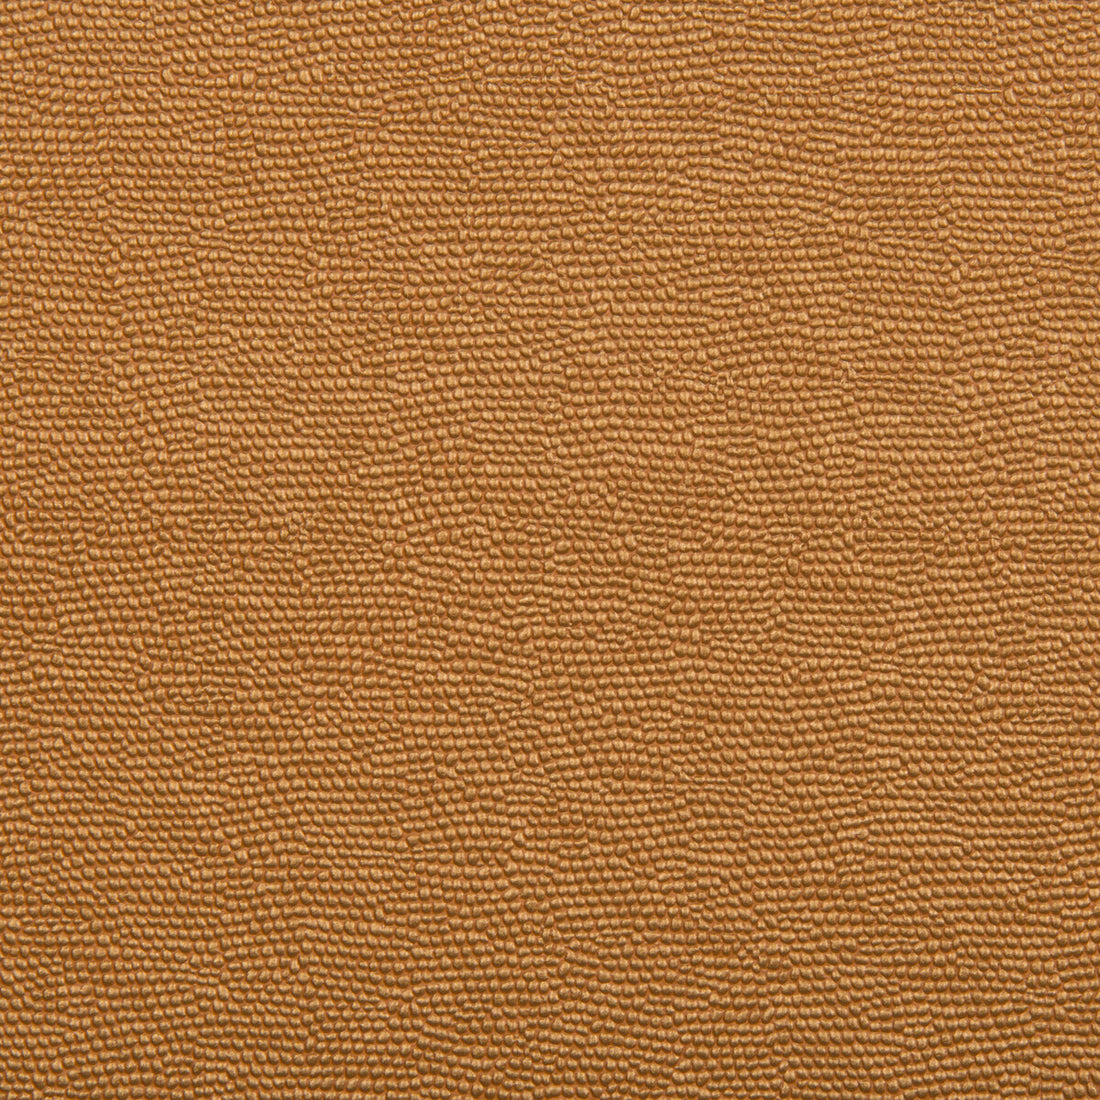 Spartan fabric in bronze color - pattern SPARTAN.6.0 - by Kravet Contract in the Faux Leather Extreme Performance collection